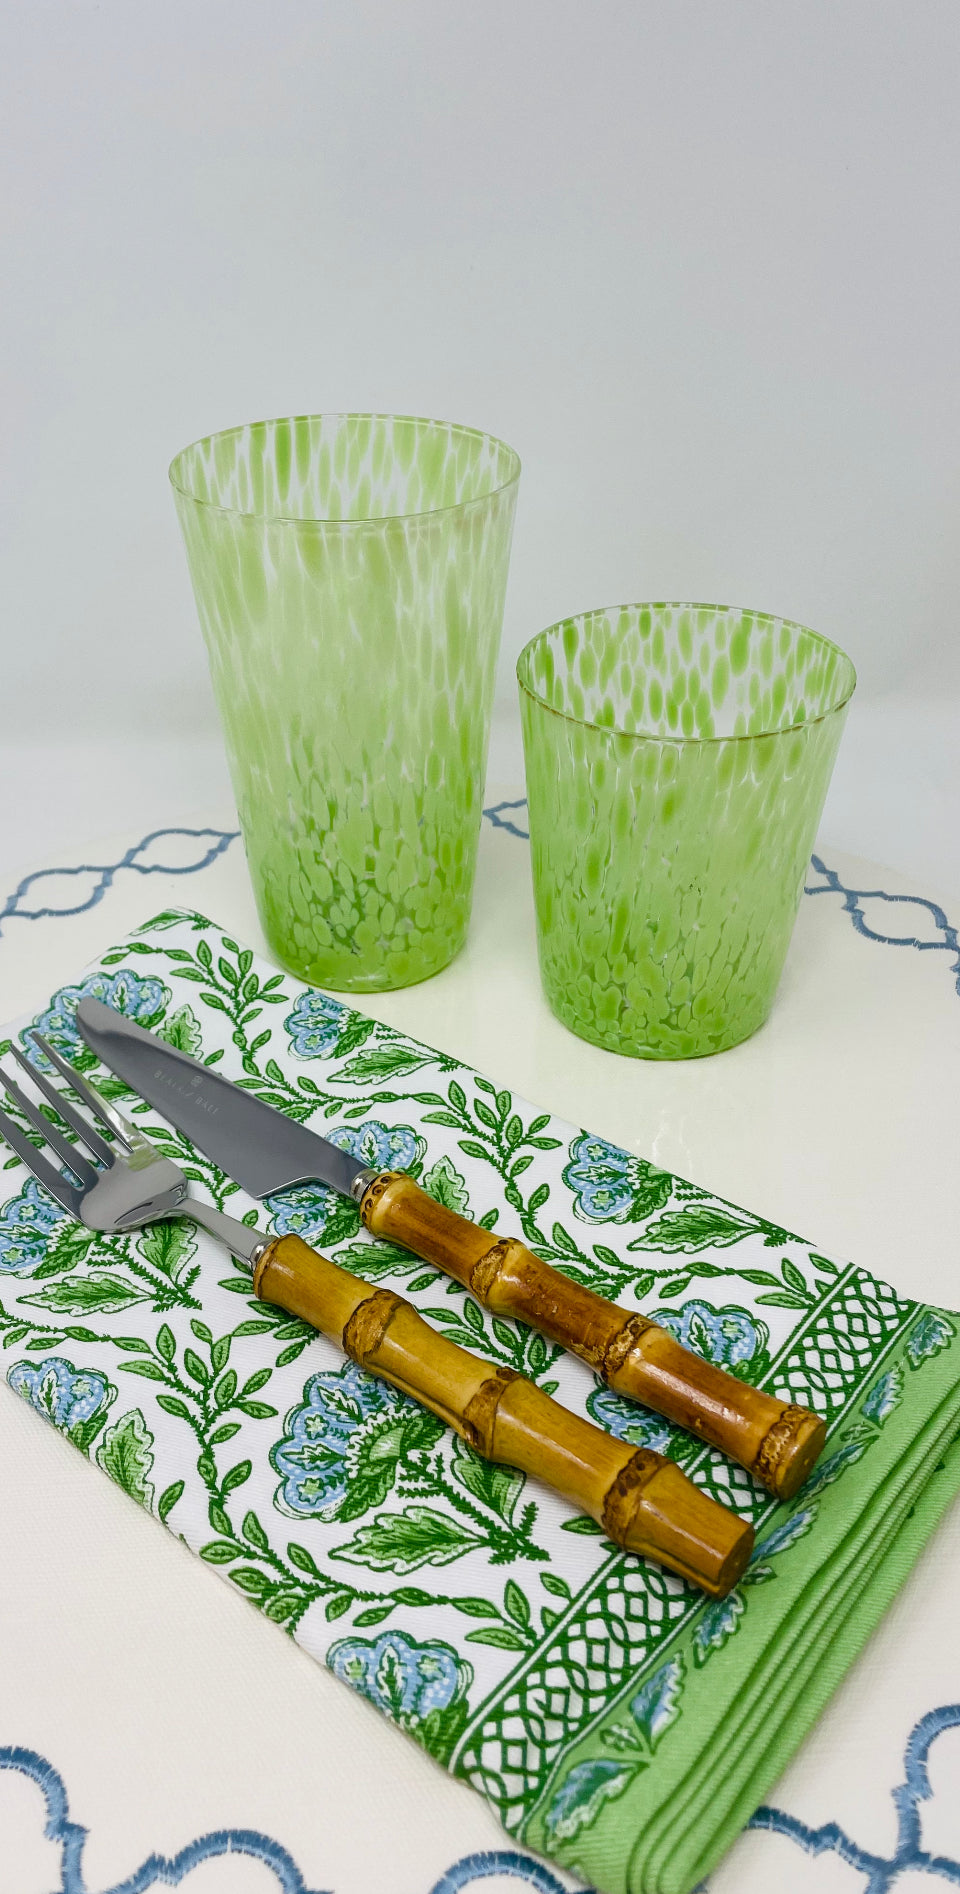 Green Speckled Glass Tumbler